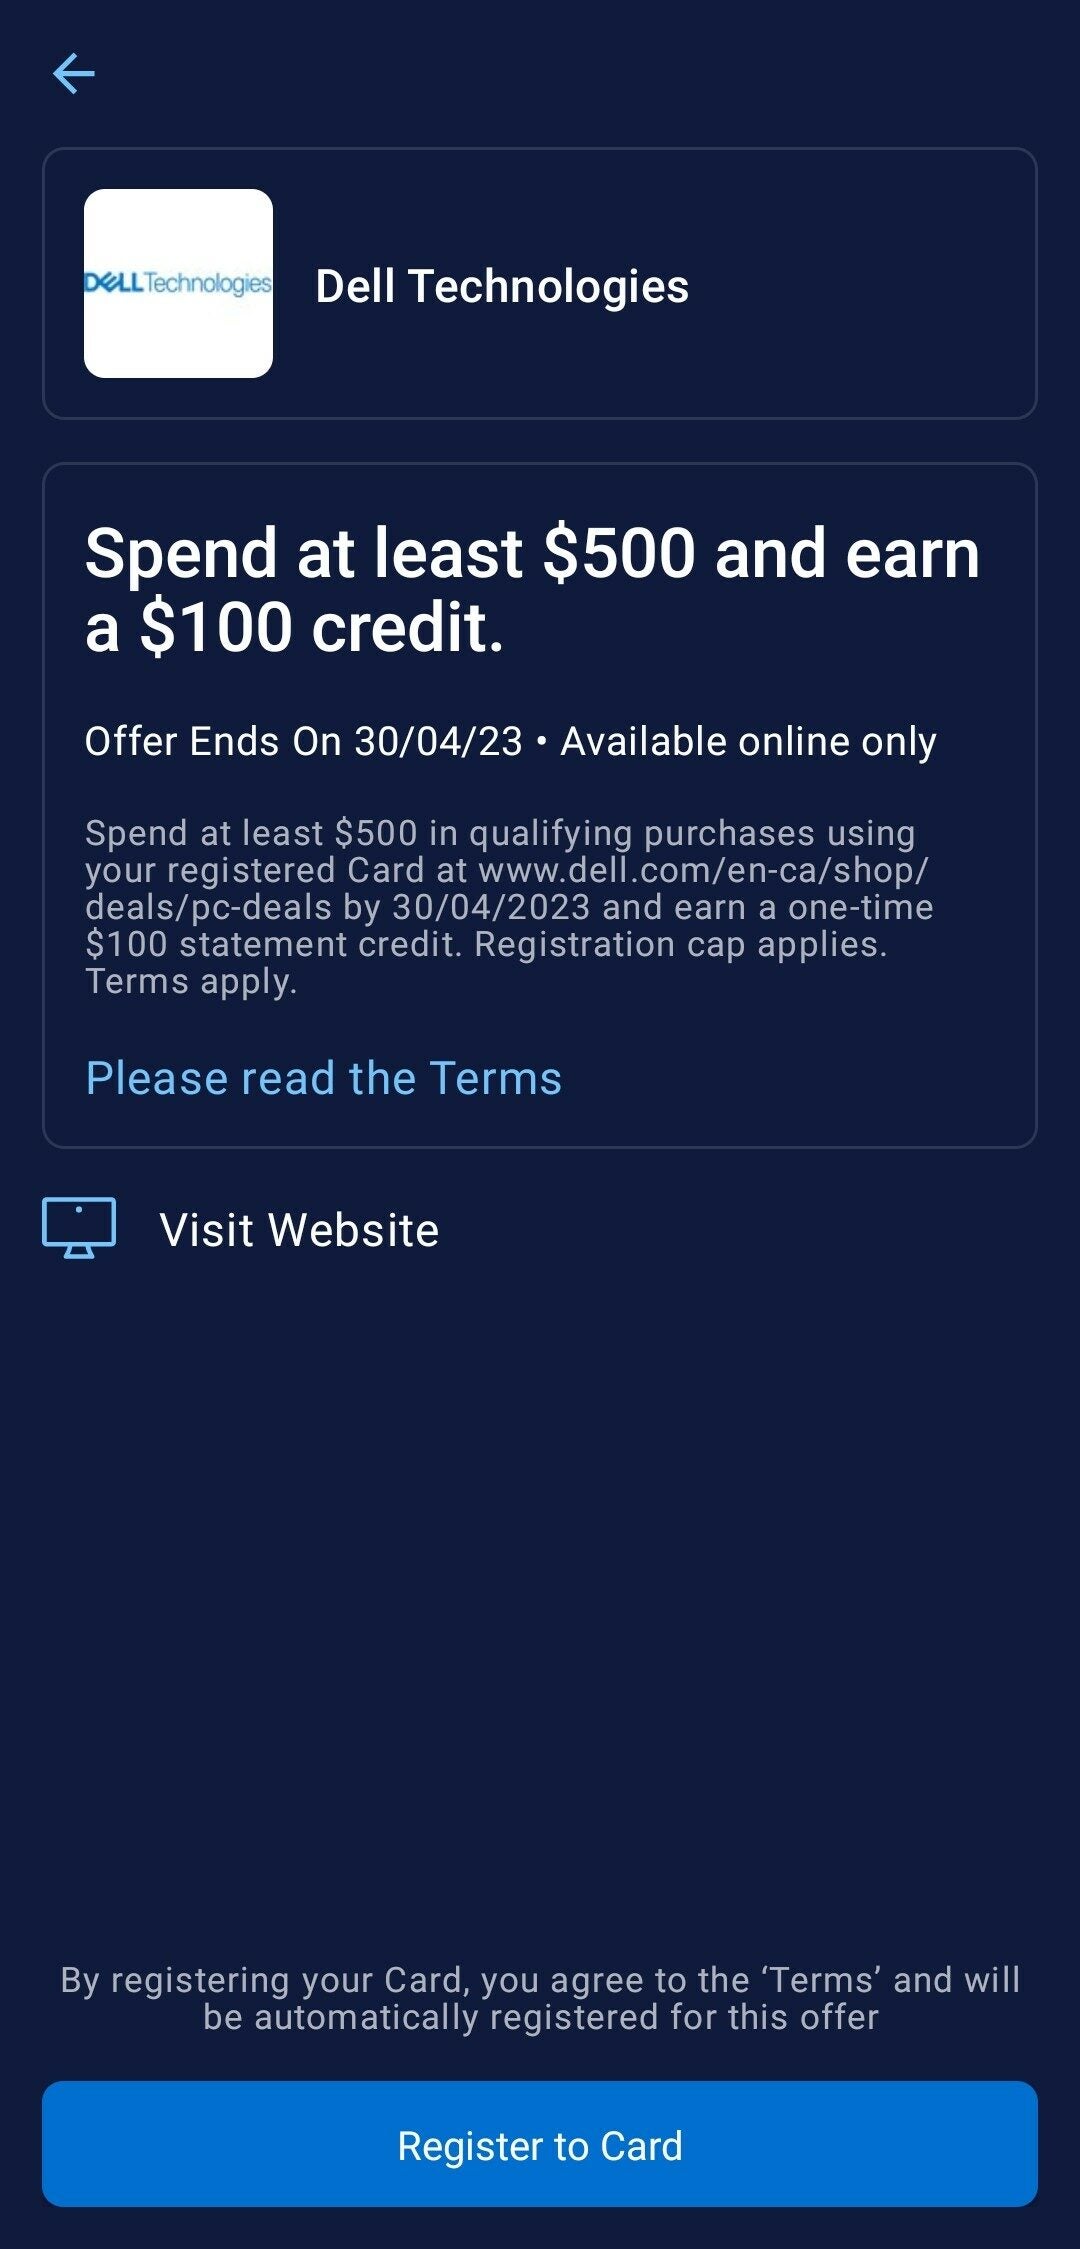 American Express] [Dell] Spend at least $500 and earn a $100 credit. -   Forums